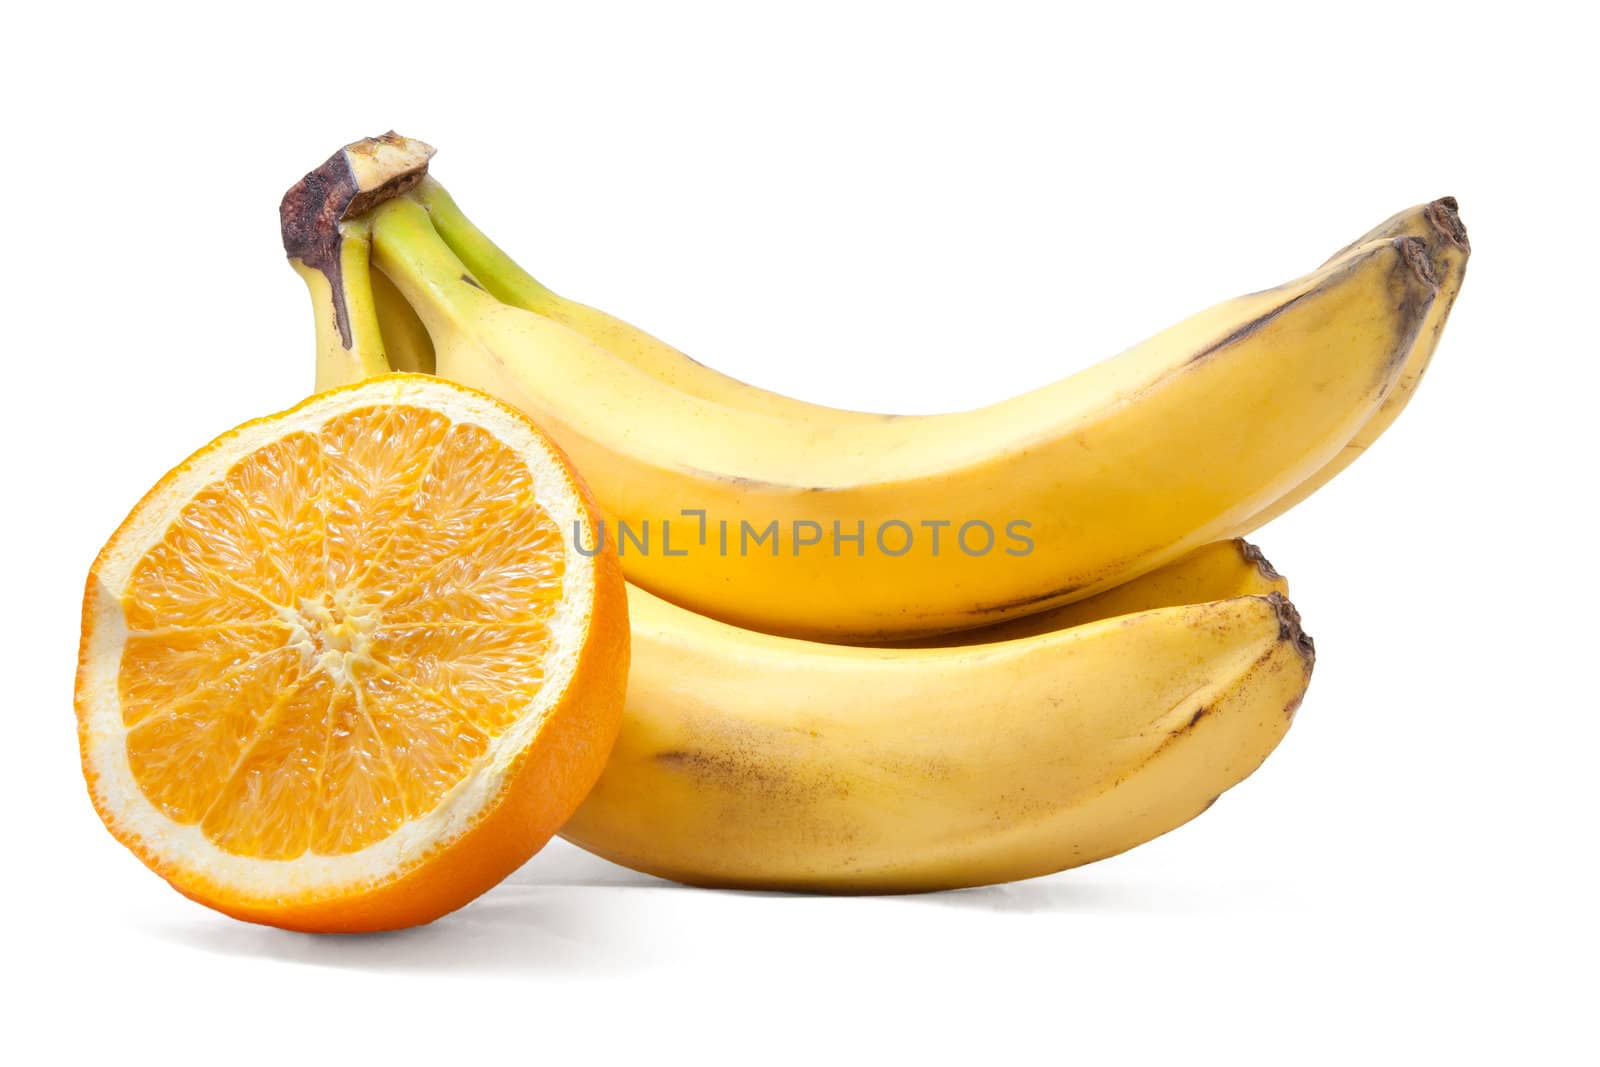 banana bunch and orange isolated on the white background.